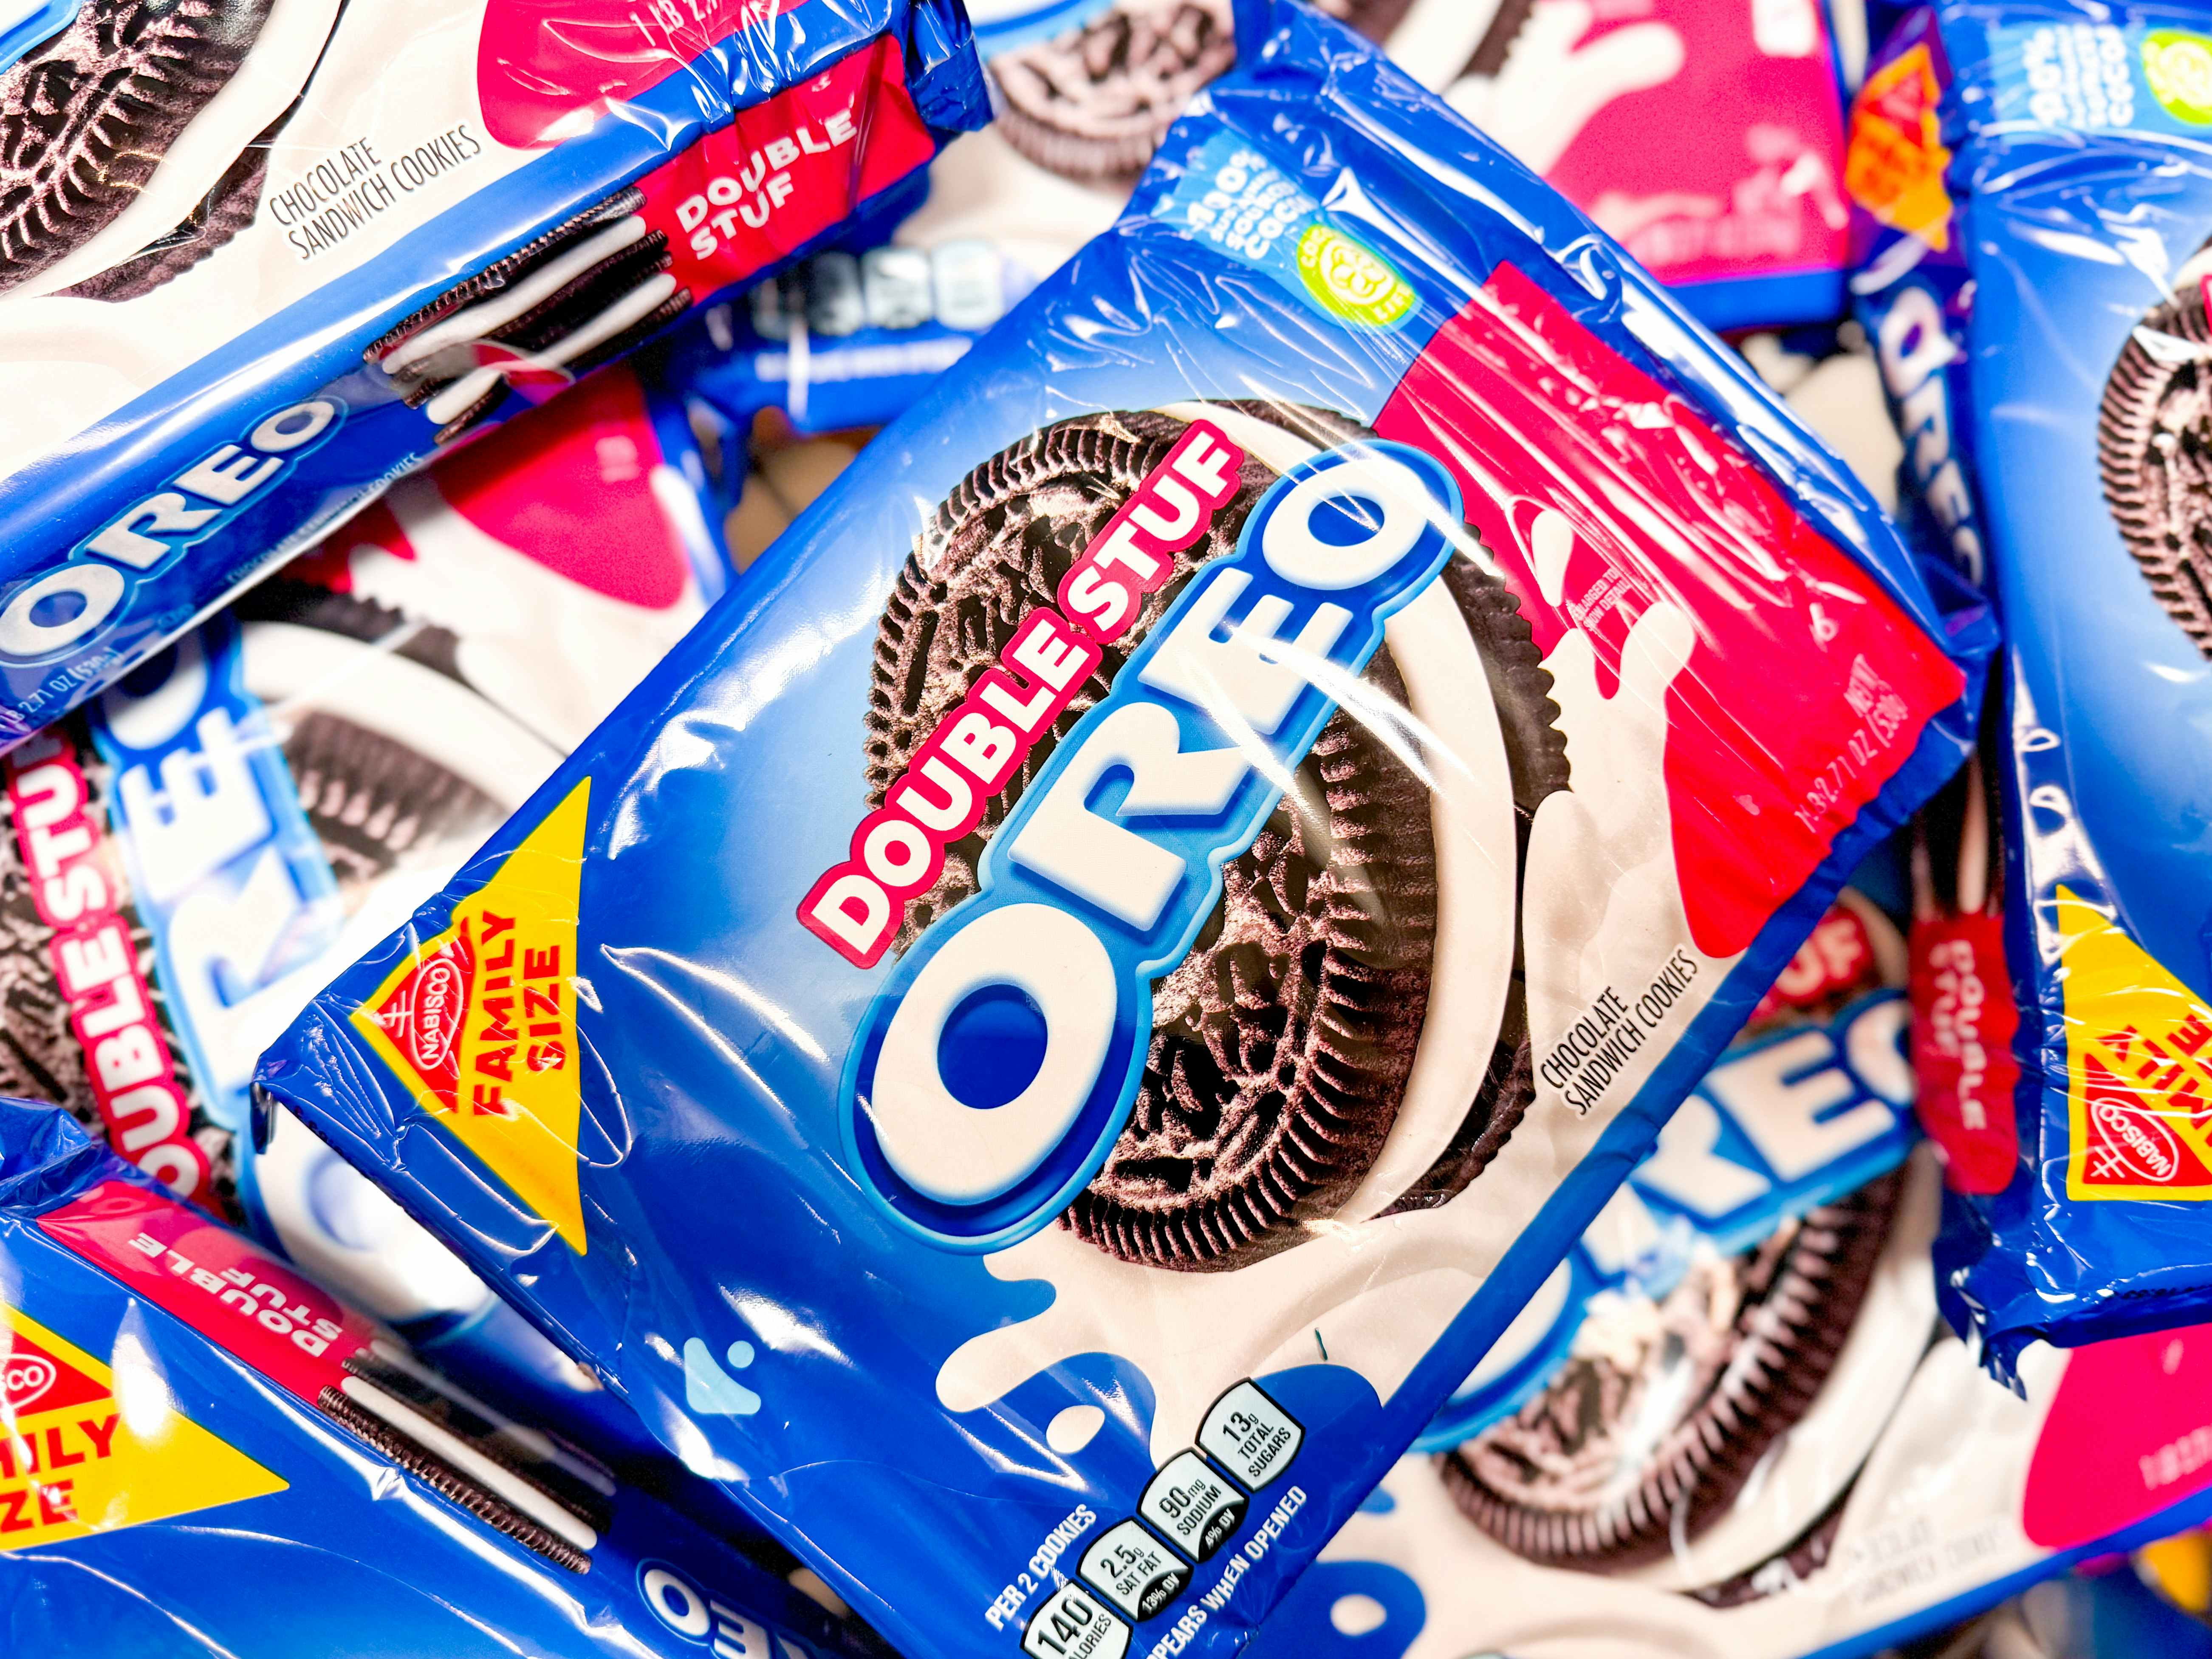 25% Off Oreo Cookie Packs — Prices as Low as $2.57 per Pack on Amazon